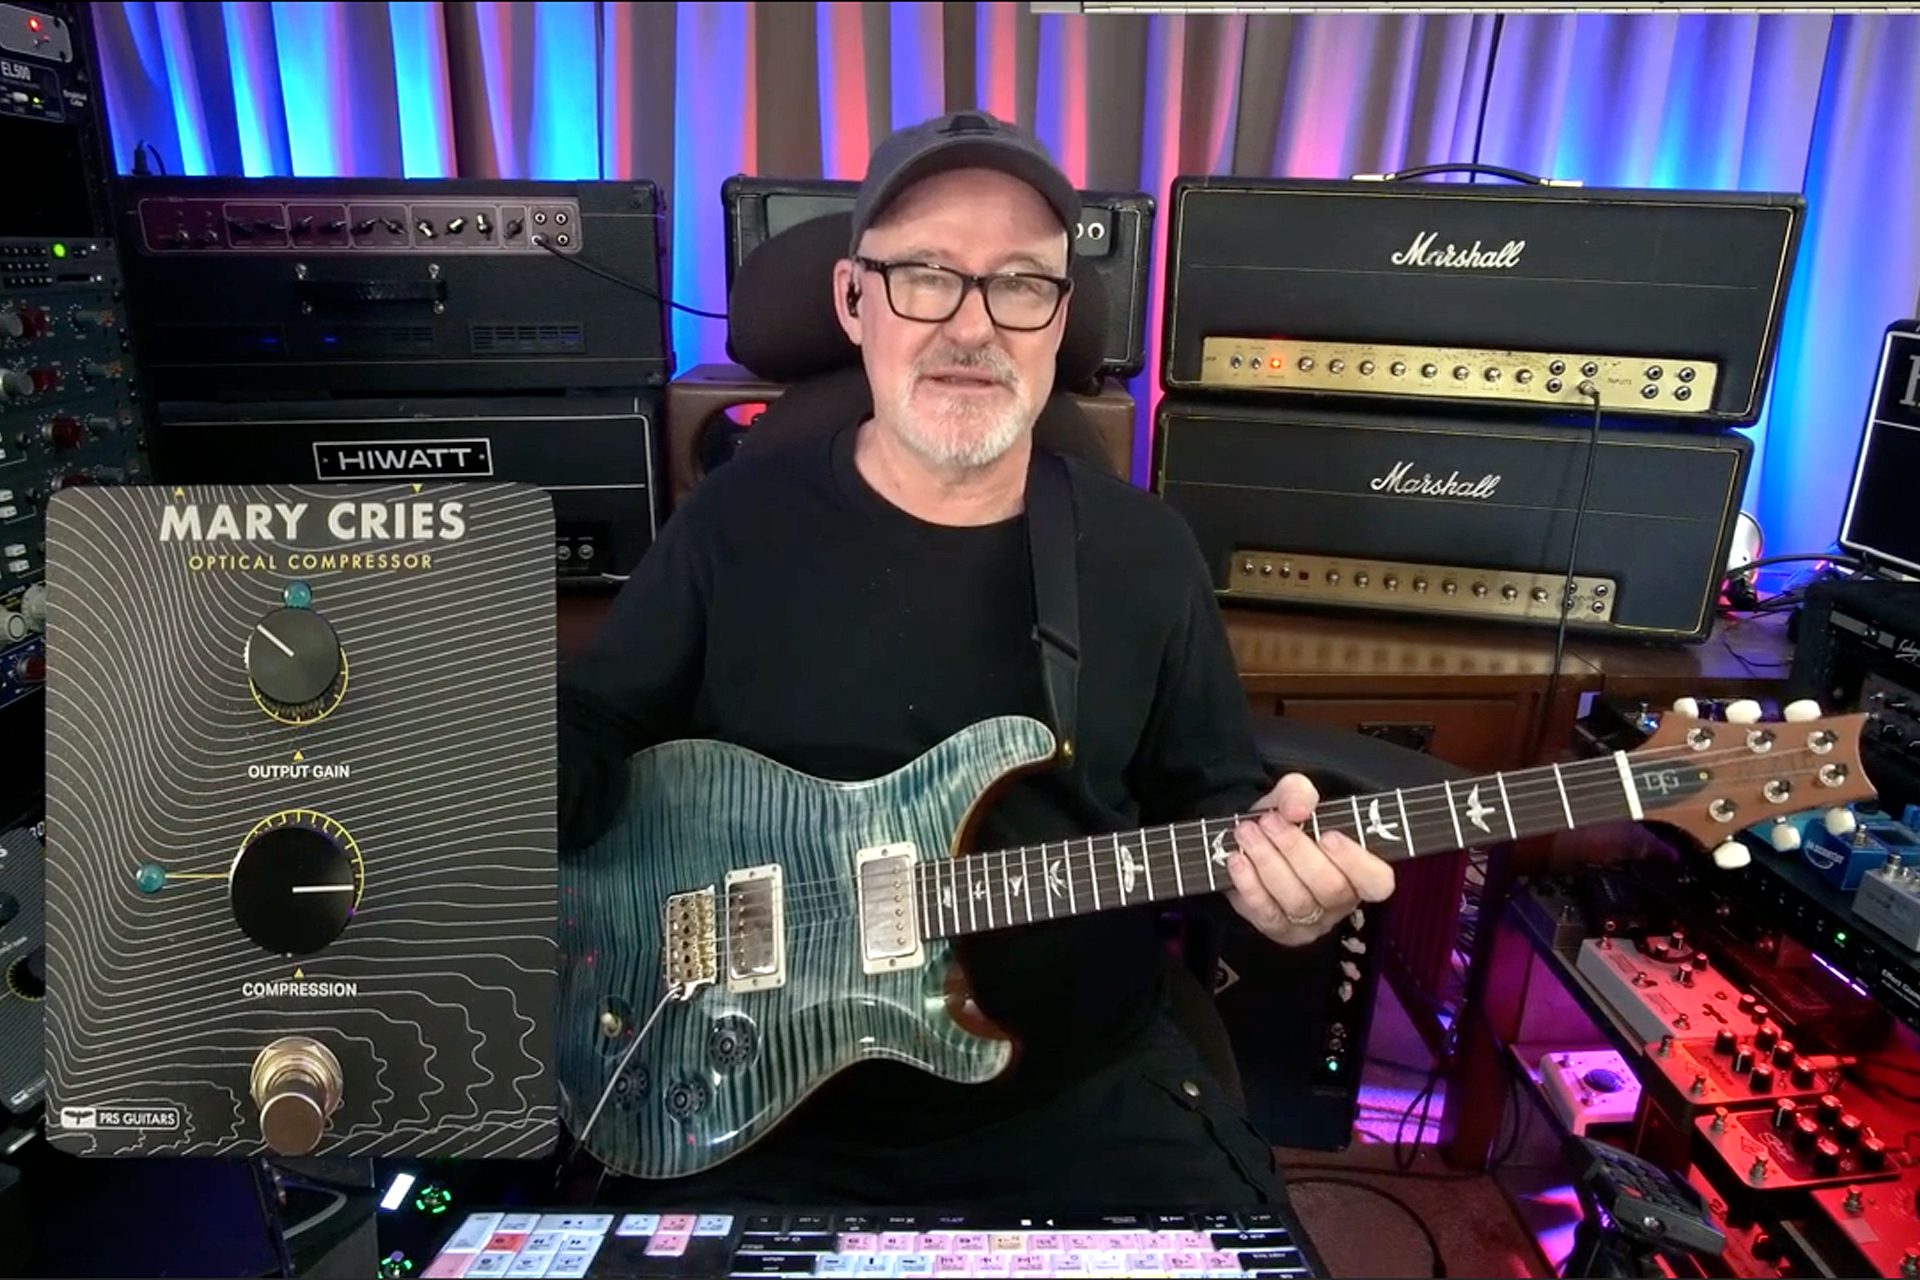 Listen to How Tim Pierce Uses The Mary Cries Pedal